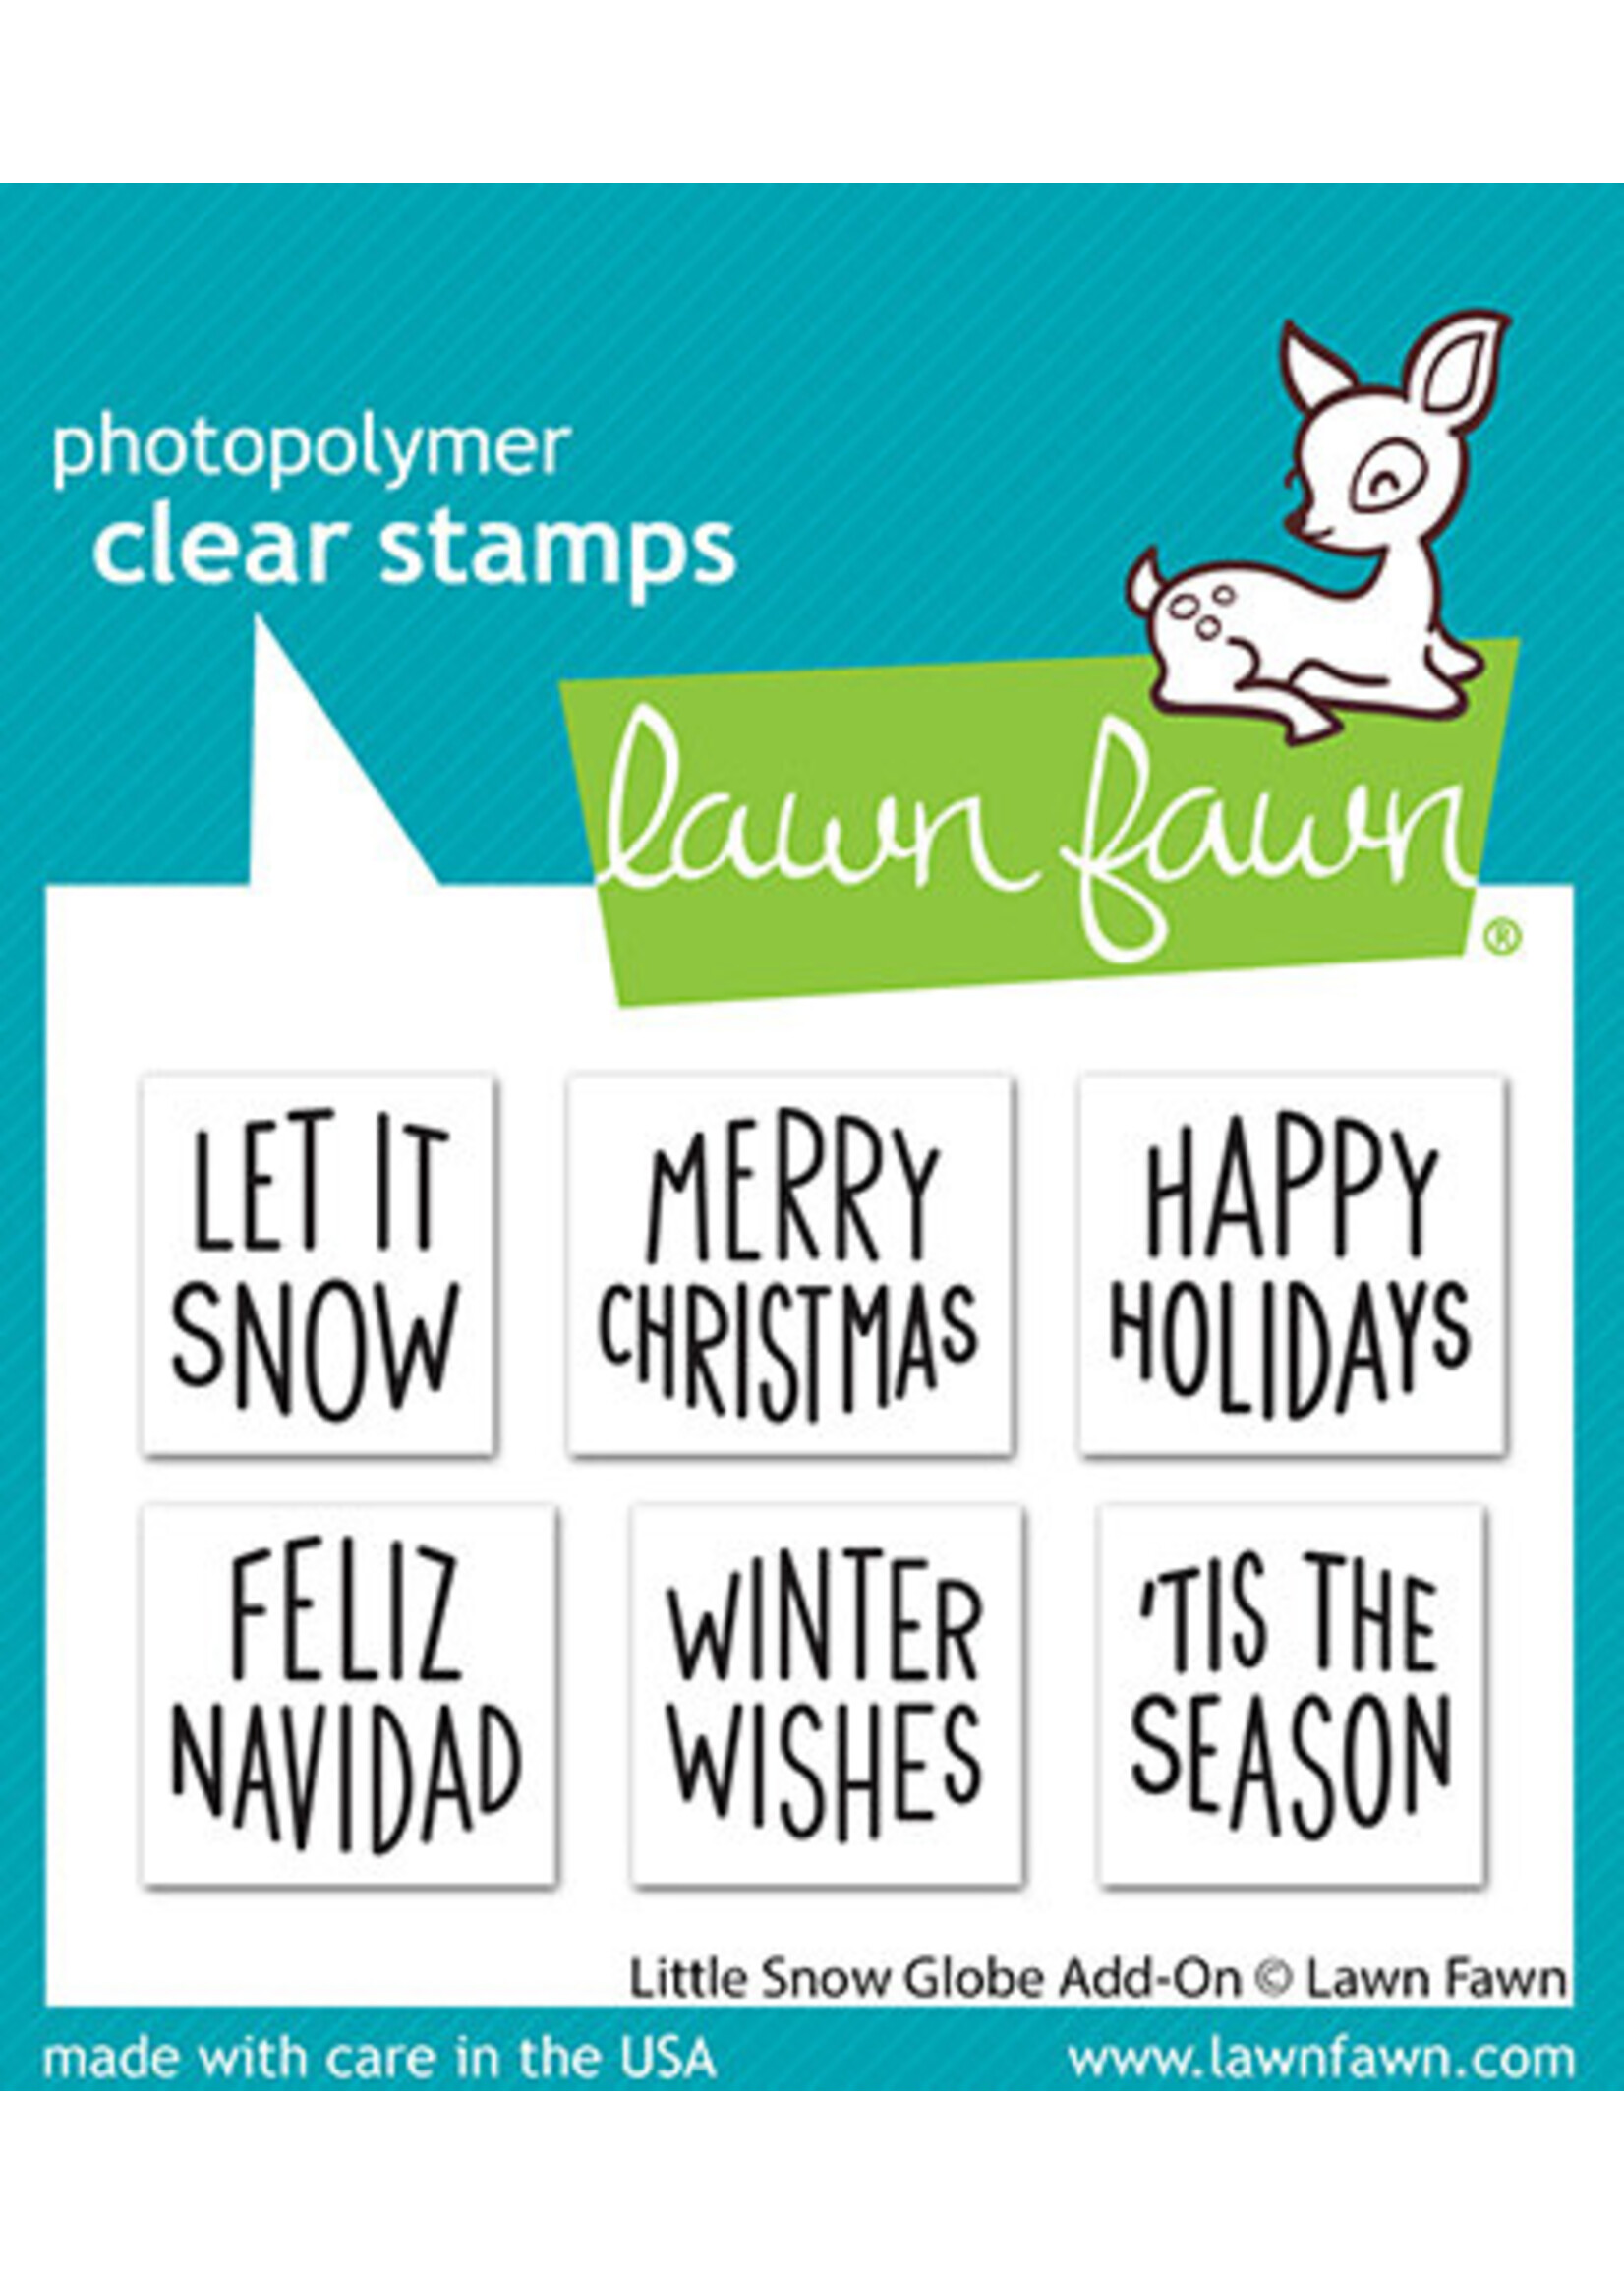 Lawn Fawn little snow globe add-on stamp